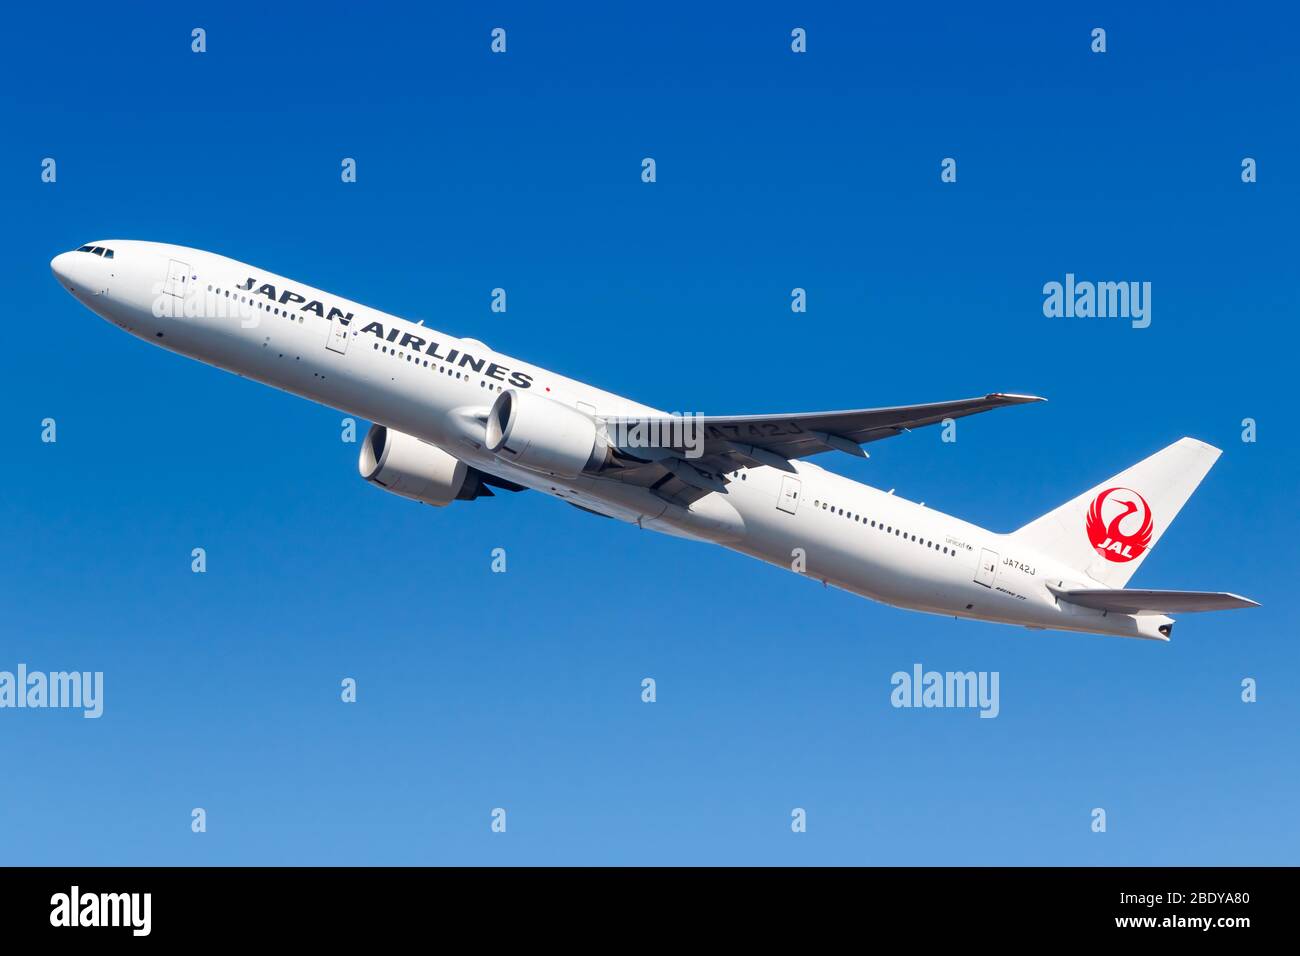 New York City, New York – March 1, 2020: Japan Airlines Boeing 777-300ER airplane at New York JFK airport (JFK) in the United States. Boeing is an Ame Stock Photo